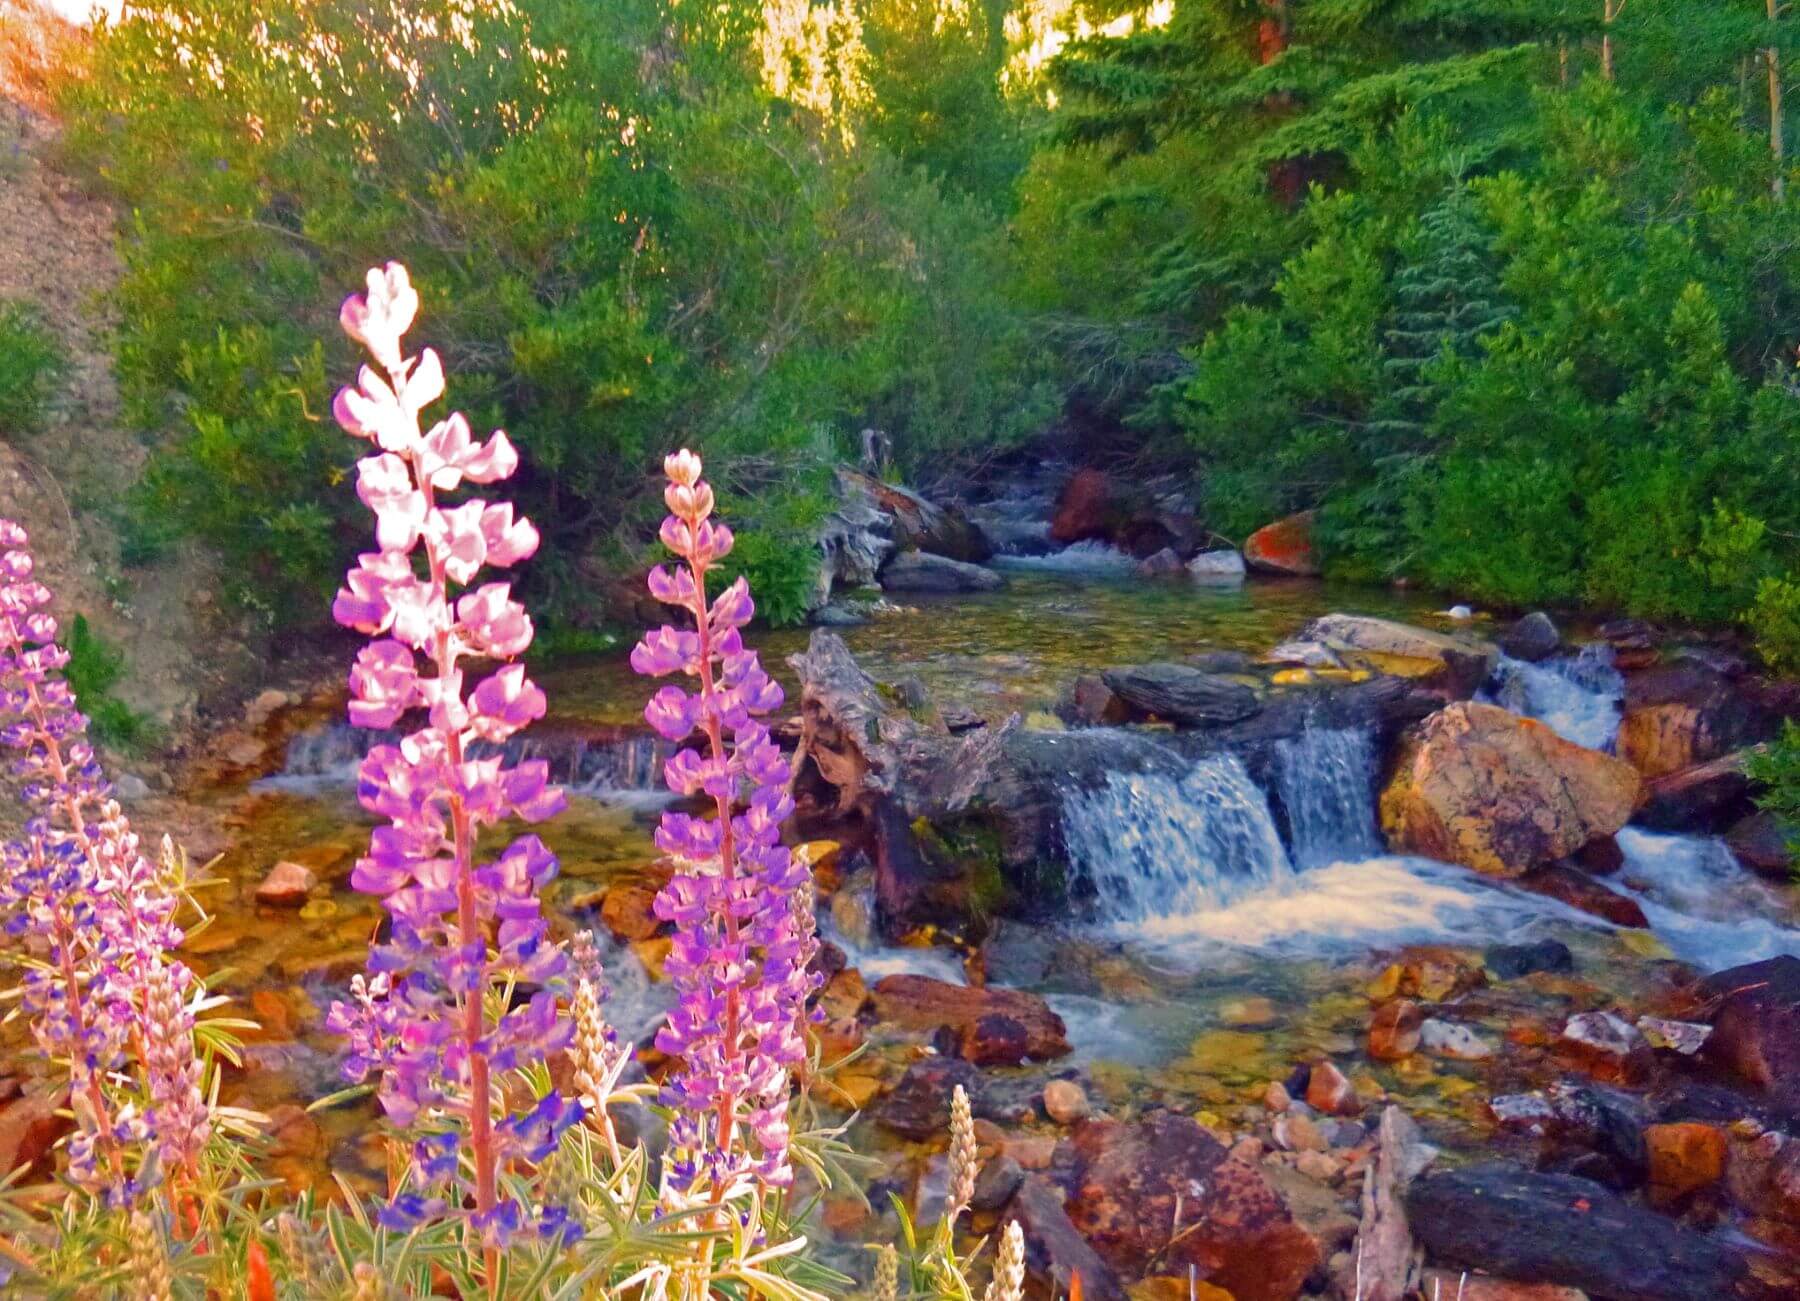 Waterfall with flowers in Idaho